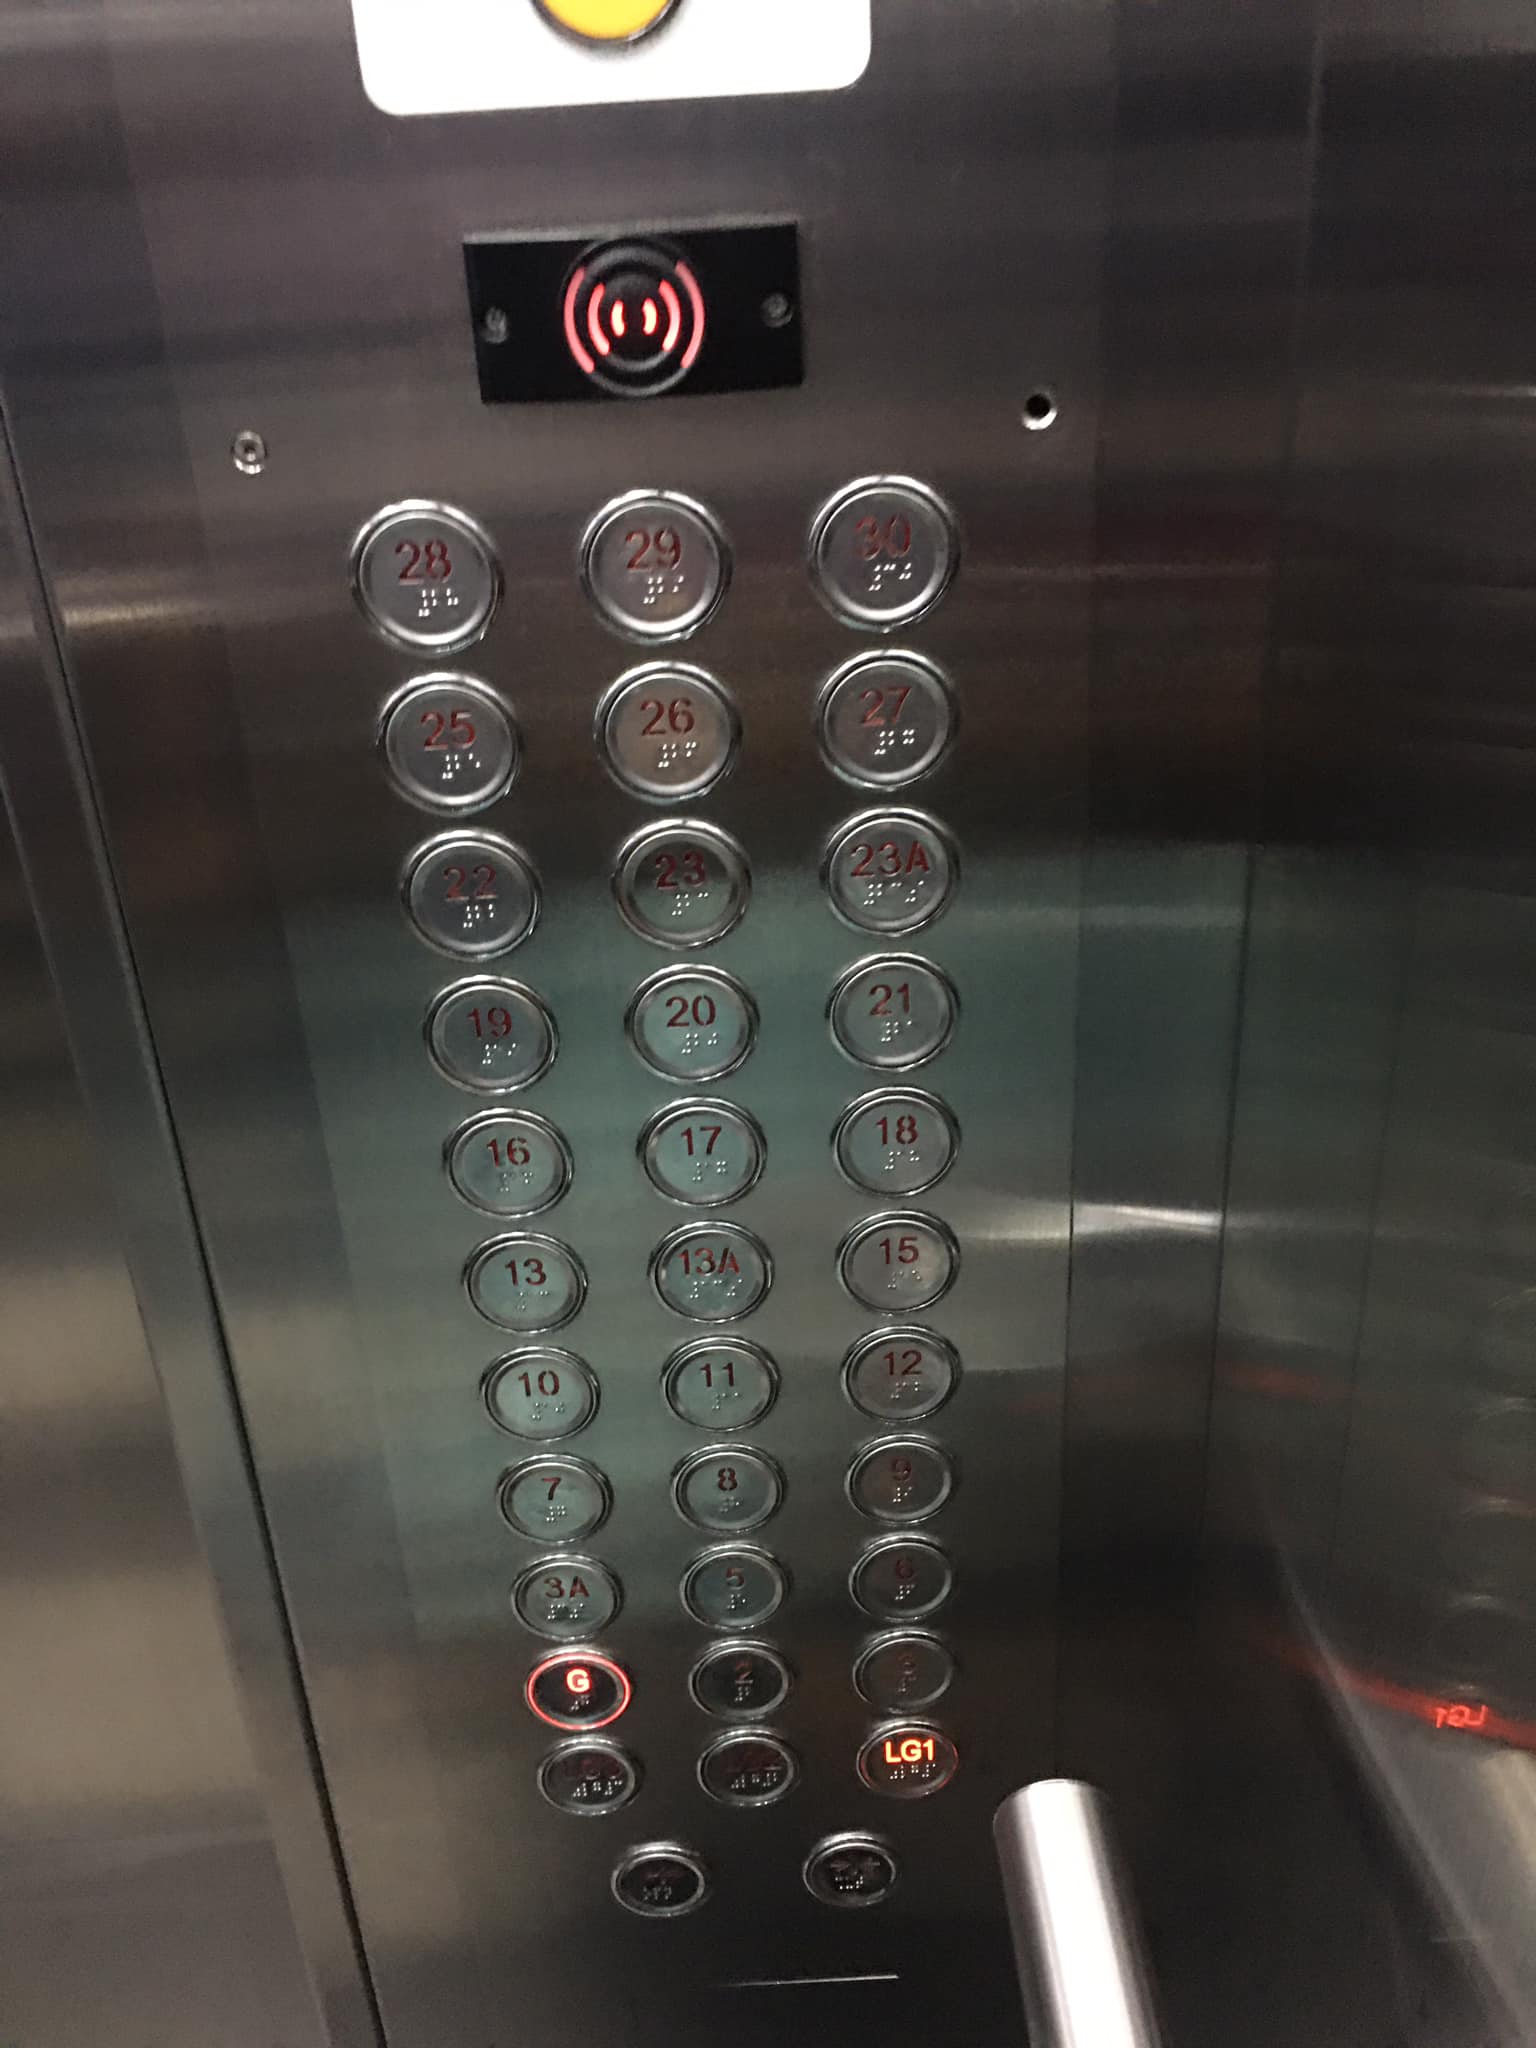 Lift buttons showing certain floors as 3a and 13a